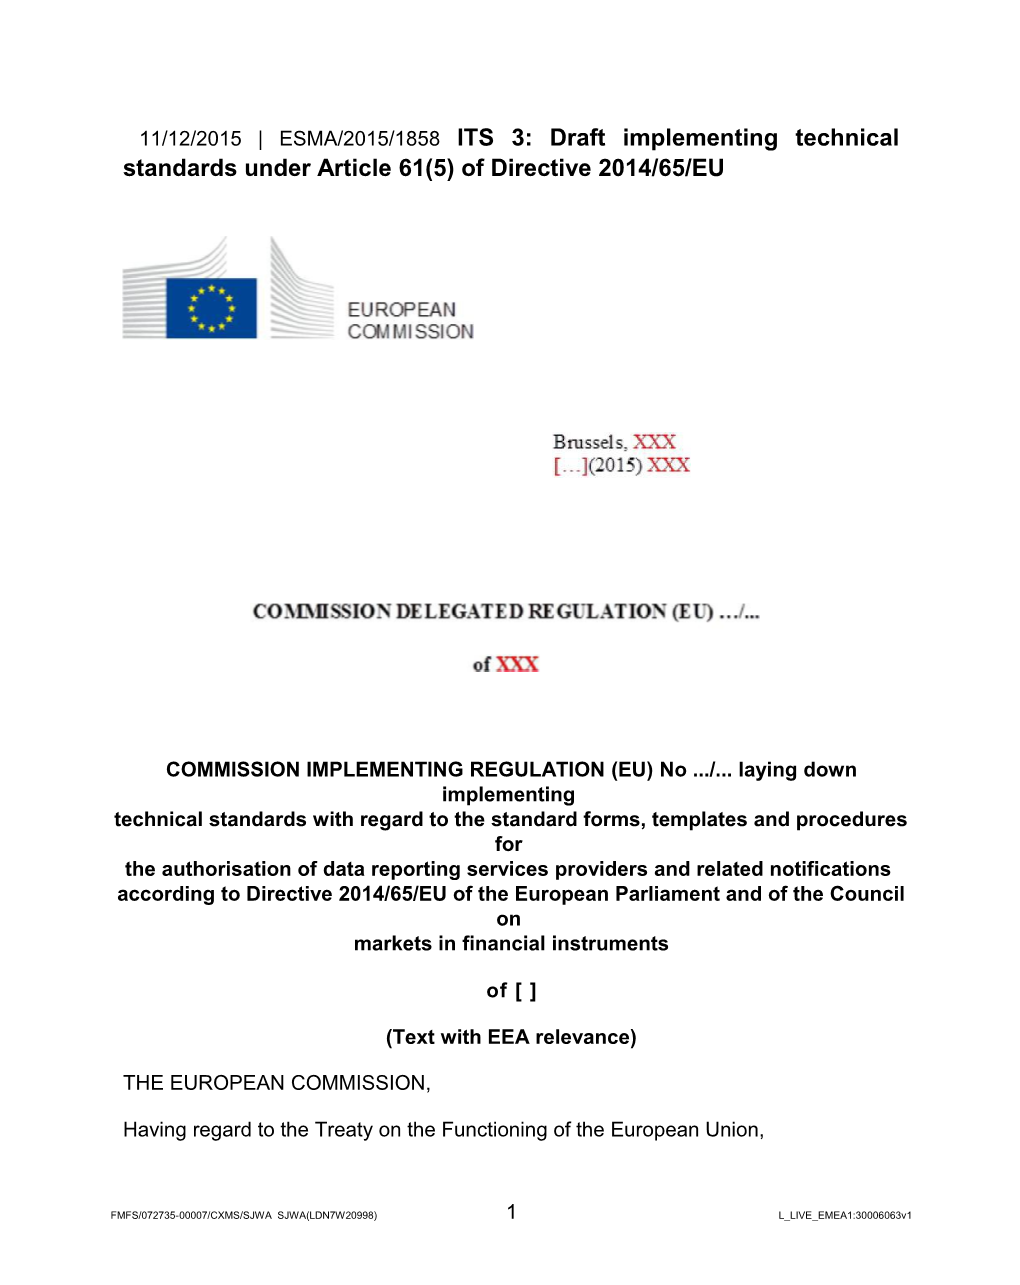 11/12/2015 ESMA/2015/1858 ITS 3: Draft Implementing Technical Standards Under Article